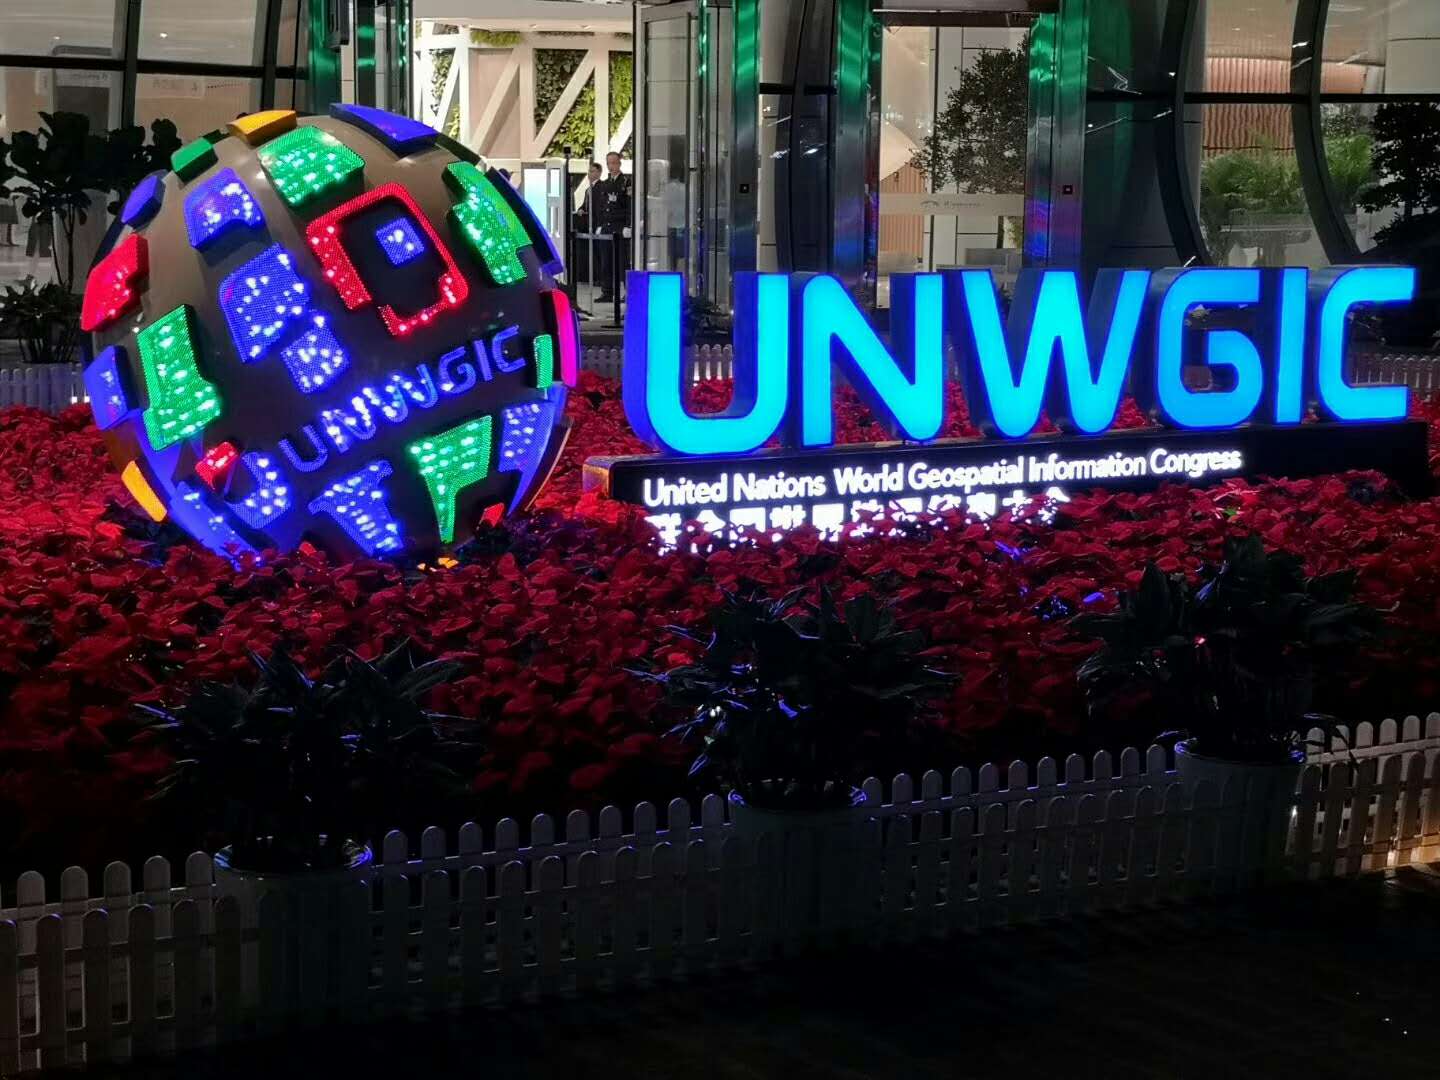 20181122111411832 - The First UNWGIC Came to an End in China